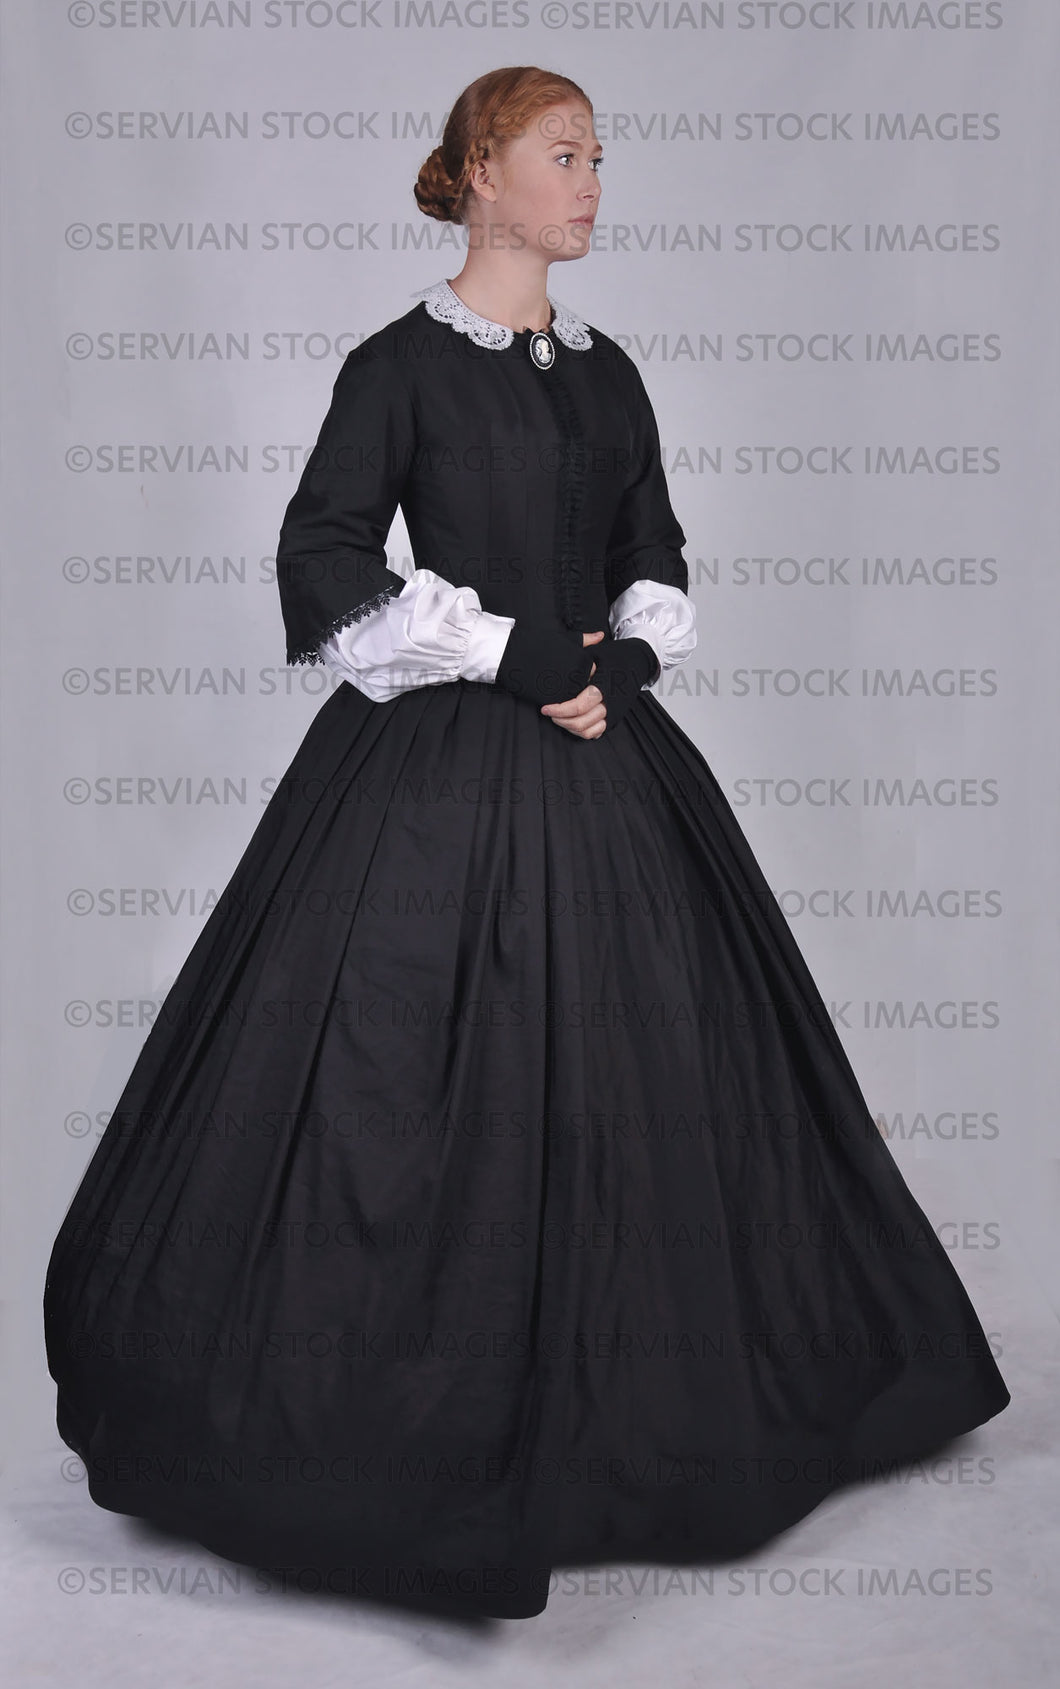 Victorian woman in a black ensemble with a lace collar   (Lauren 0745)